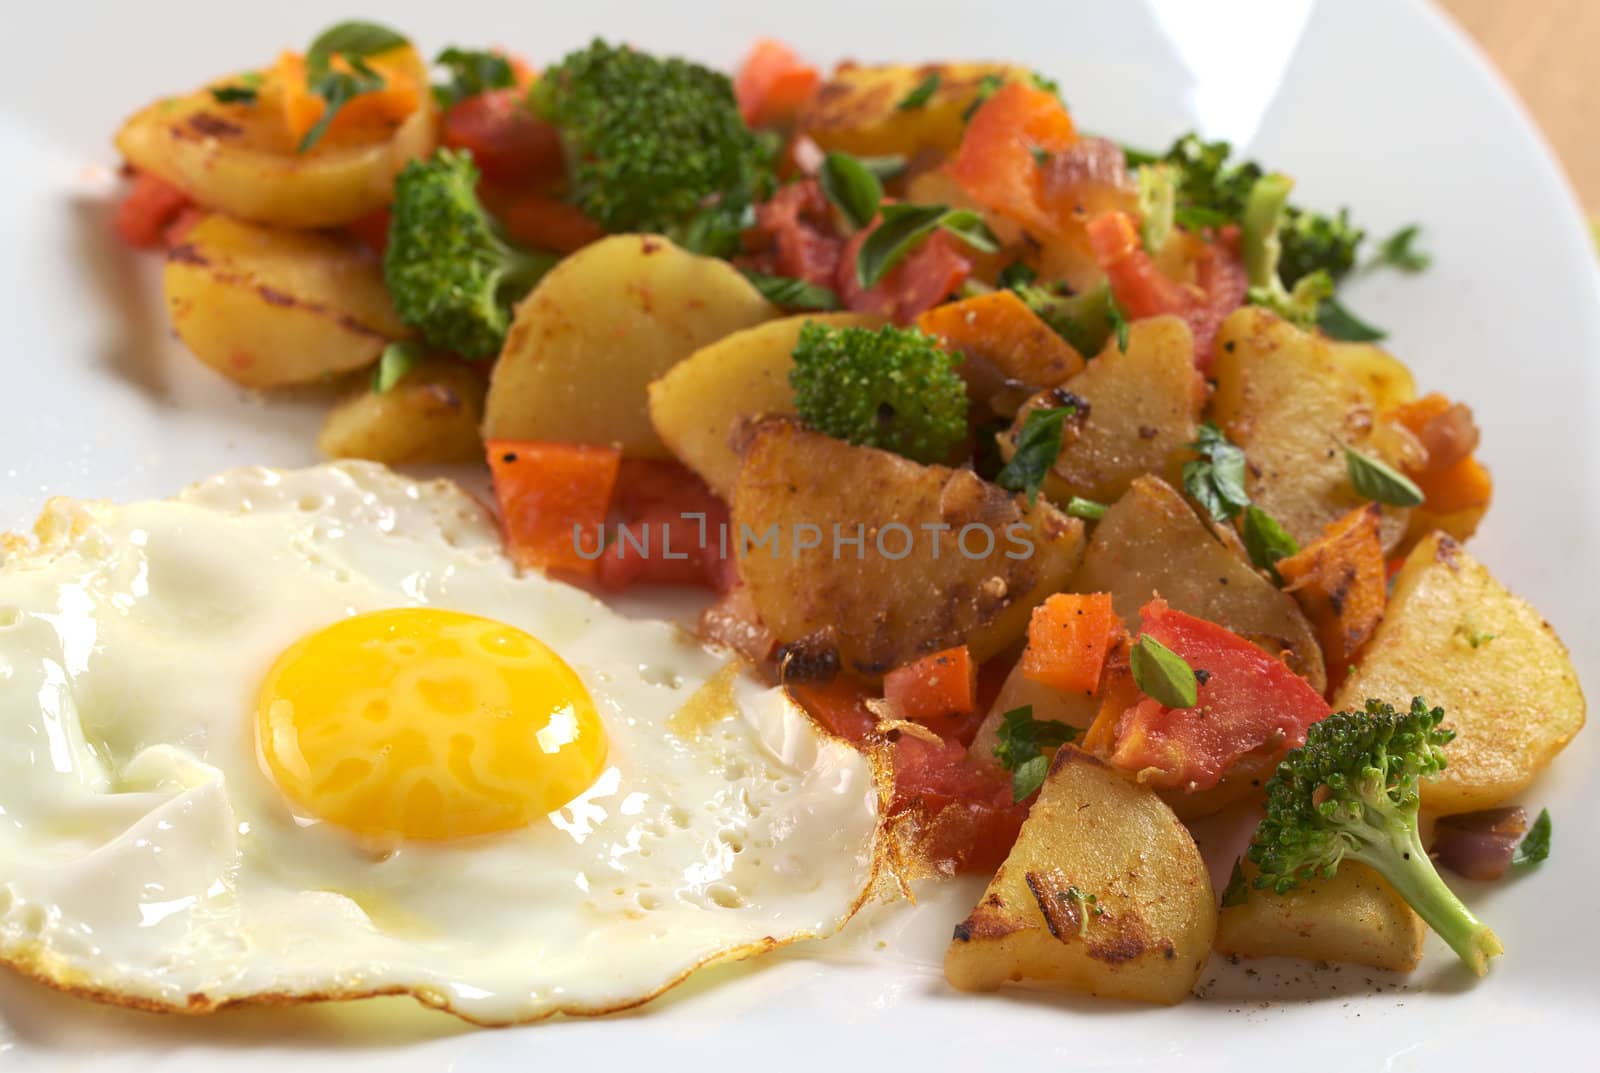 Fried Egg with Fried Vegetables by ildi